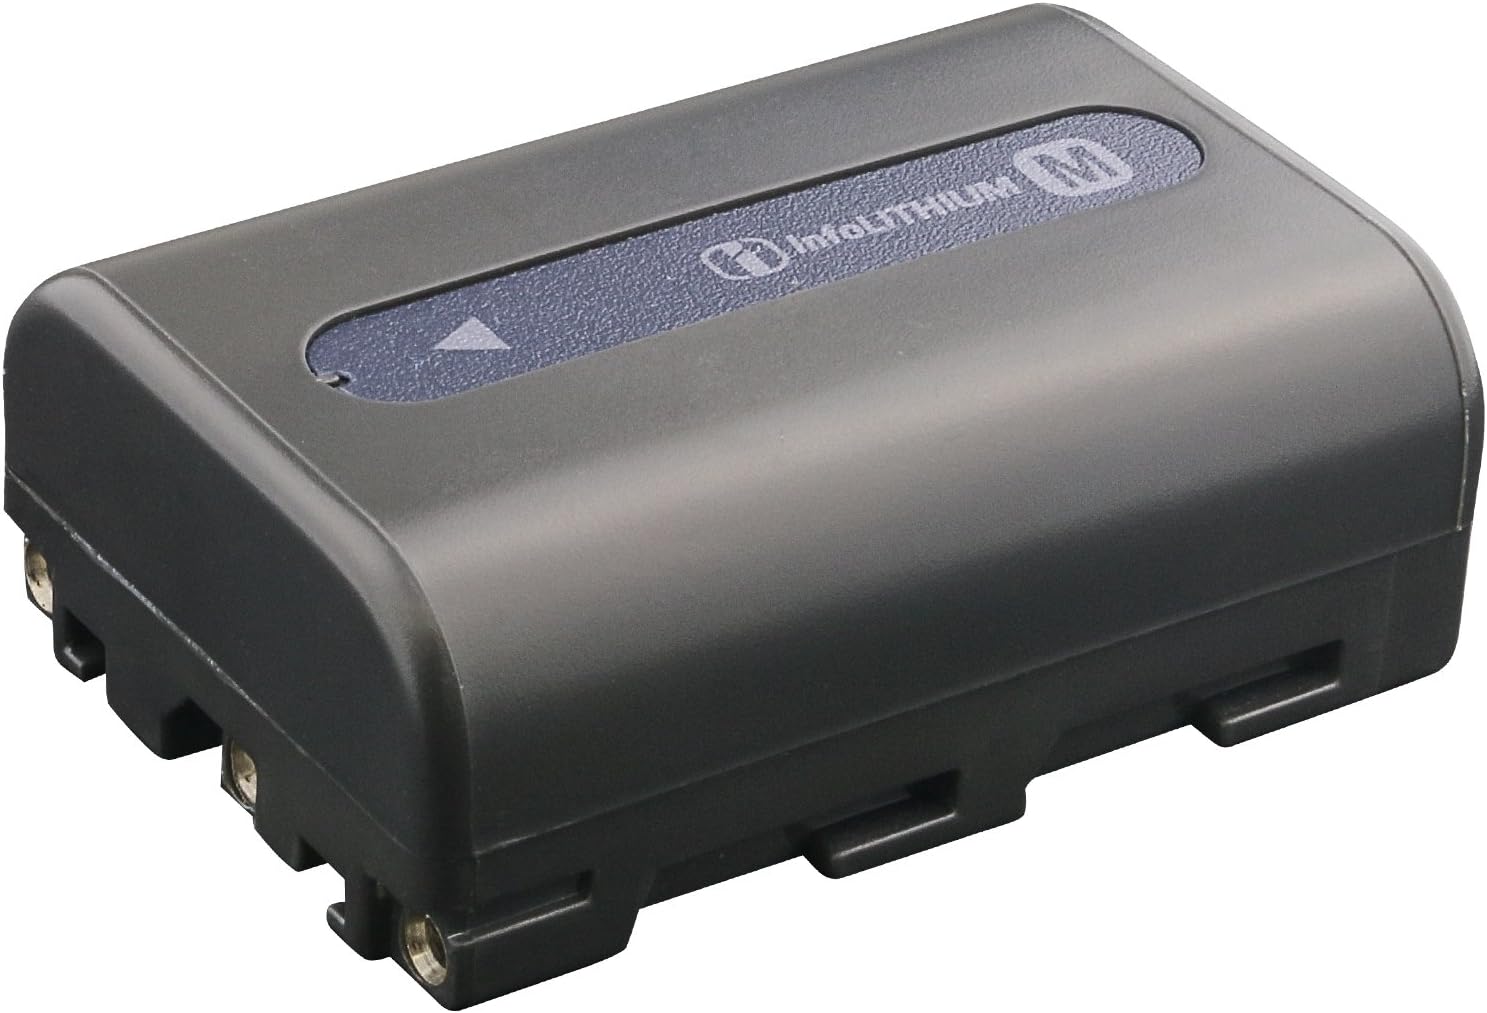 Camcorder Batteries: How to Maximize Battery Life and Performance